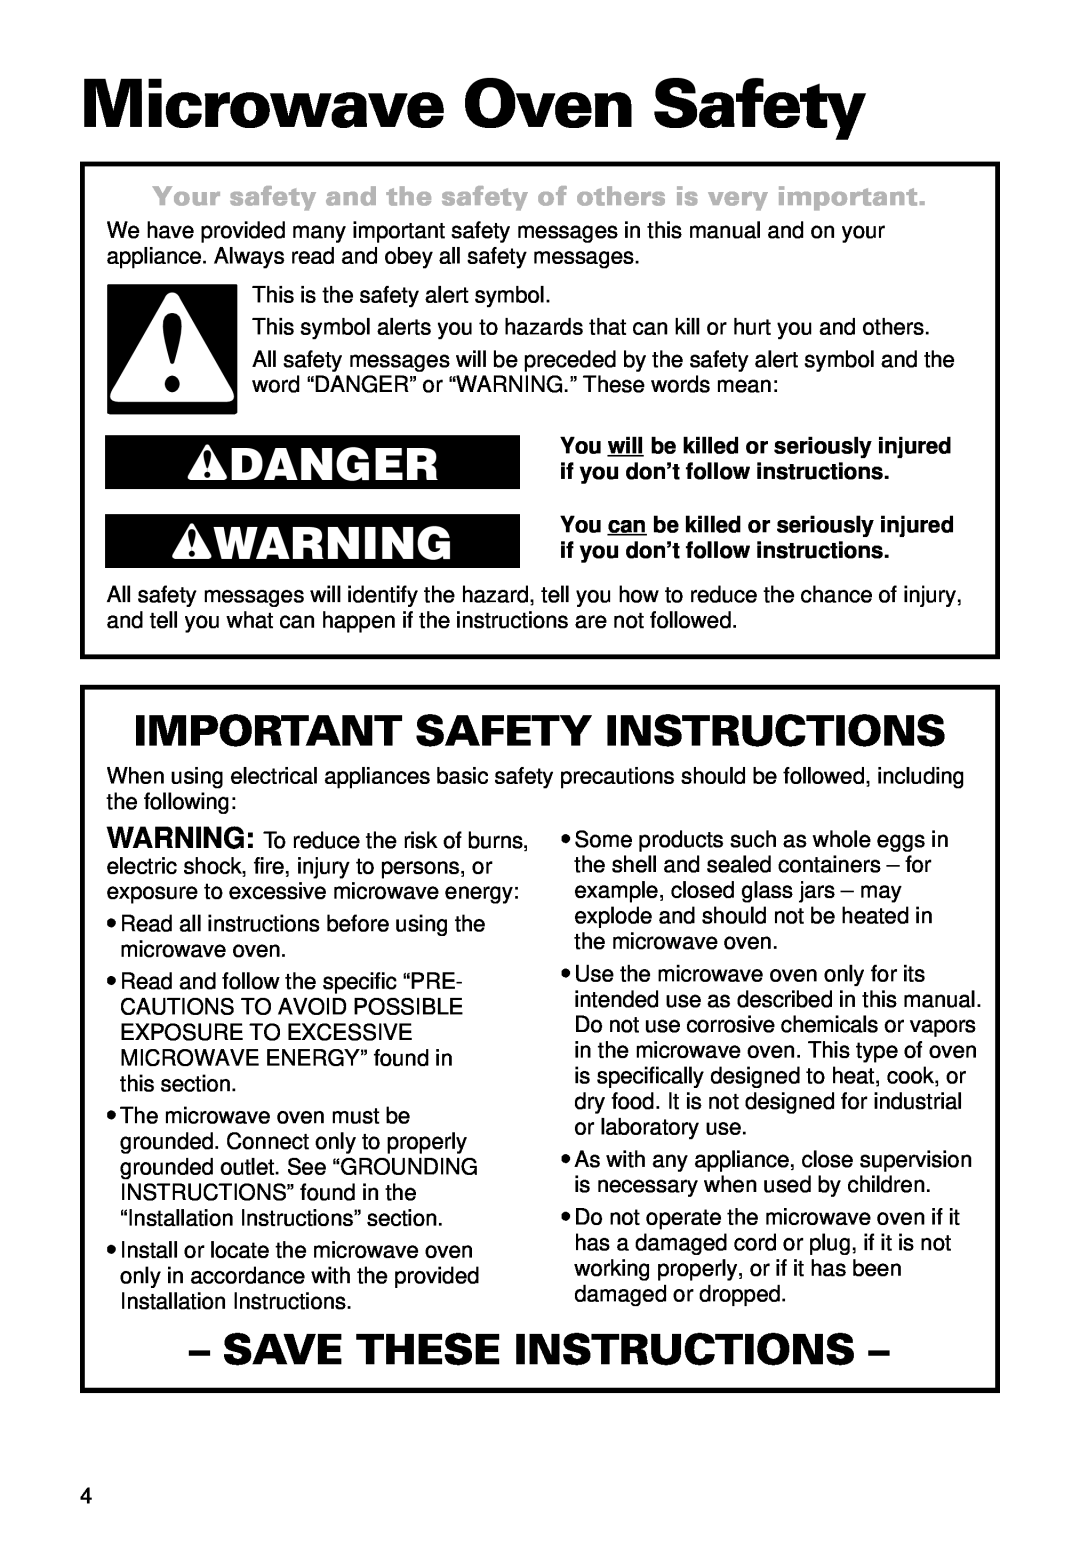 Whirlpool MT9100SF Microwave Oven Safety, wDANGER wWARNING, Important Safety Instructions, Save These Instructions 